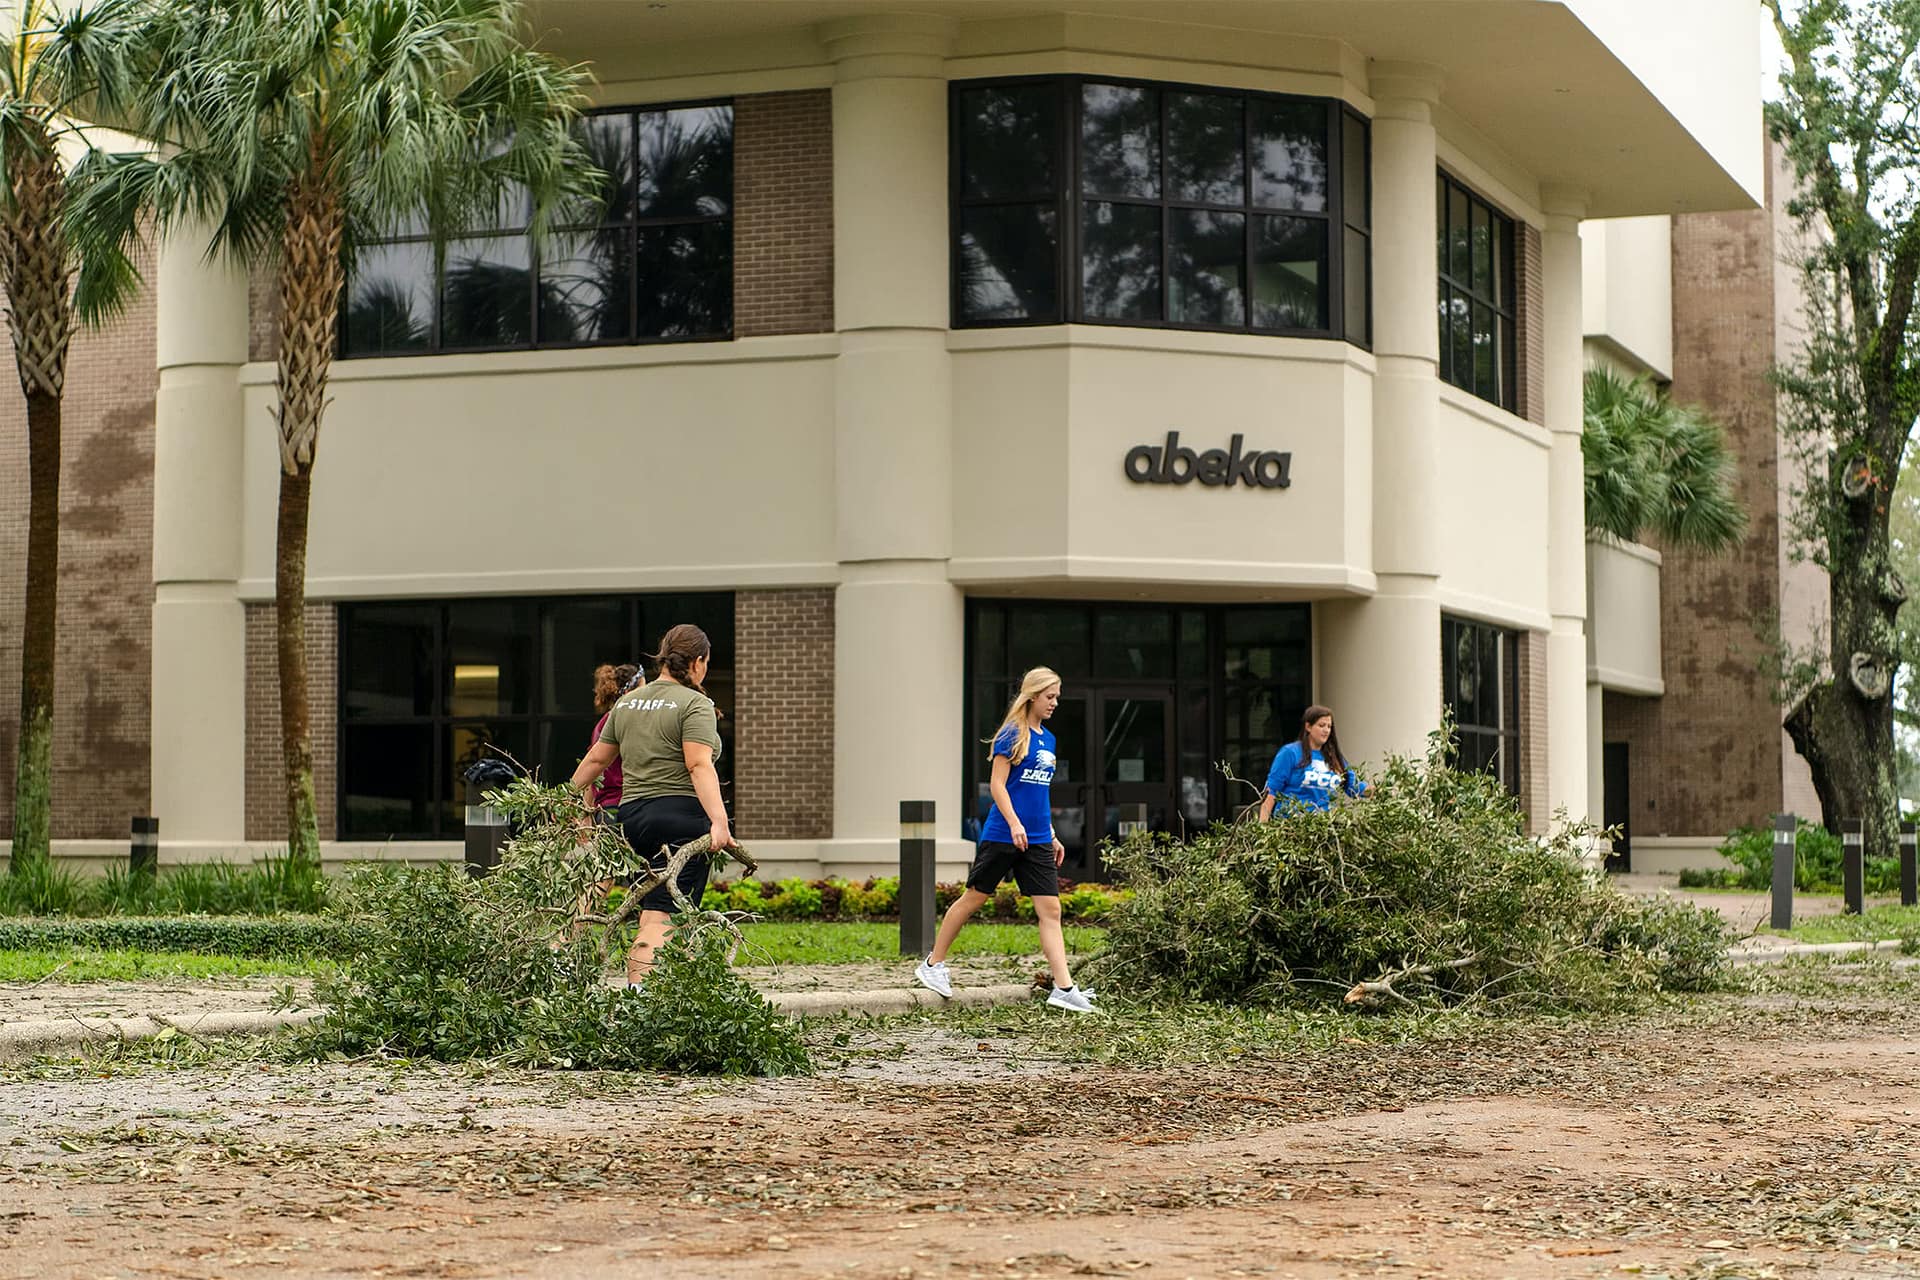 Students clean up outside the Abeka building